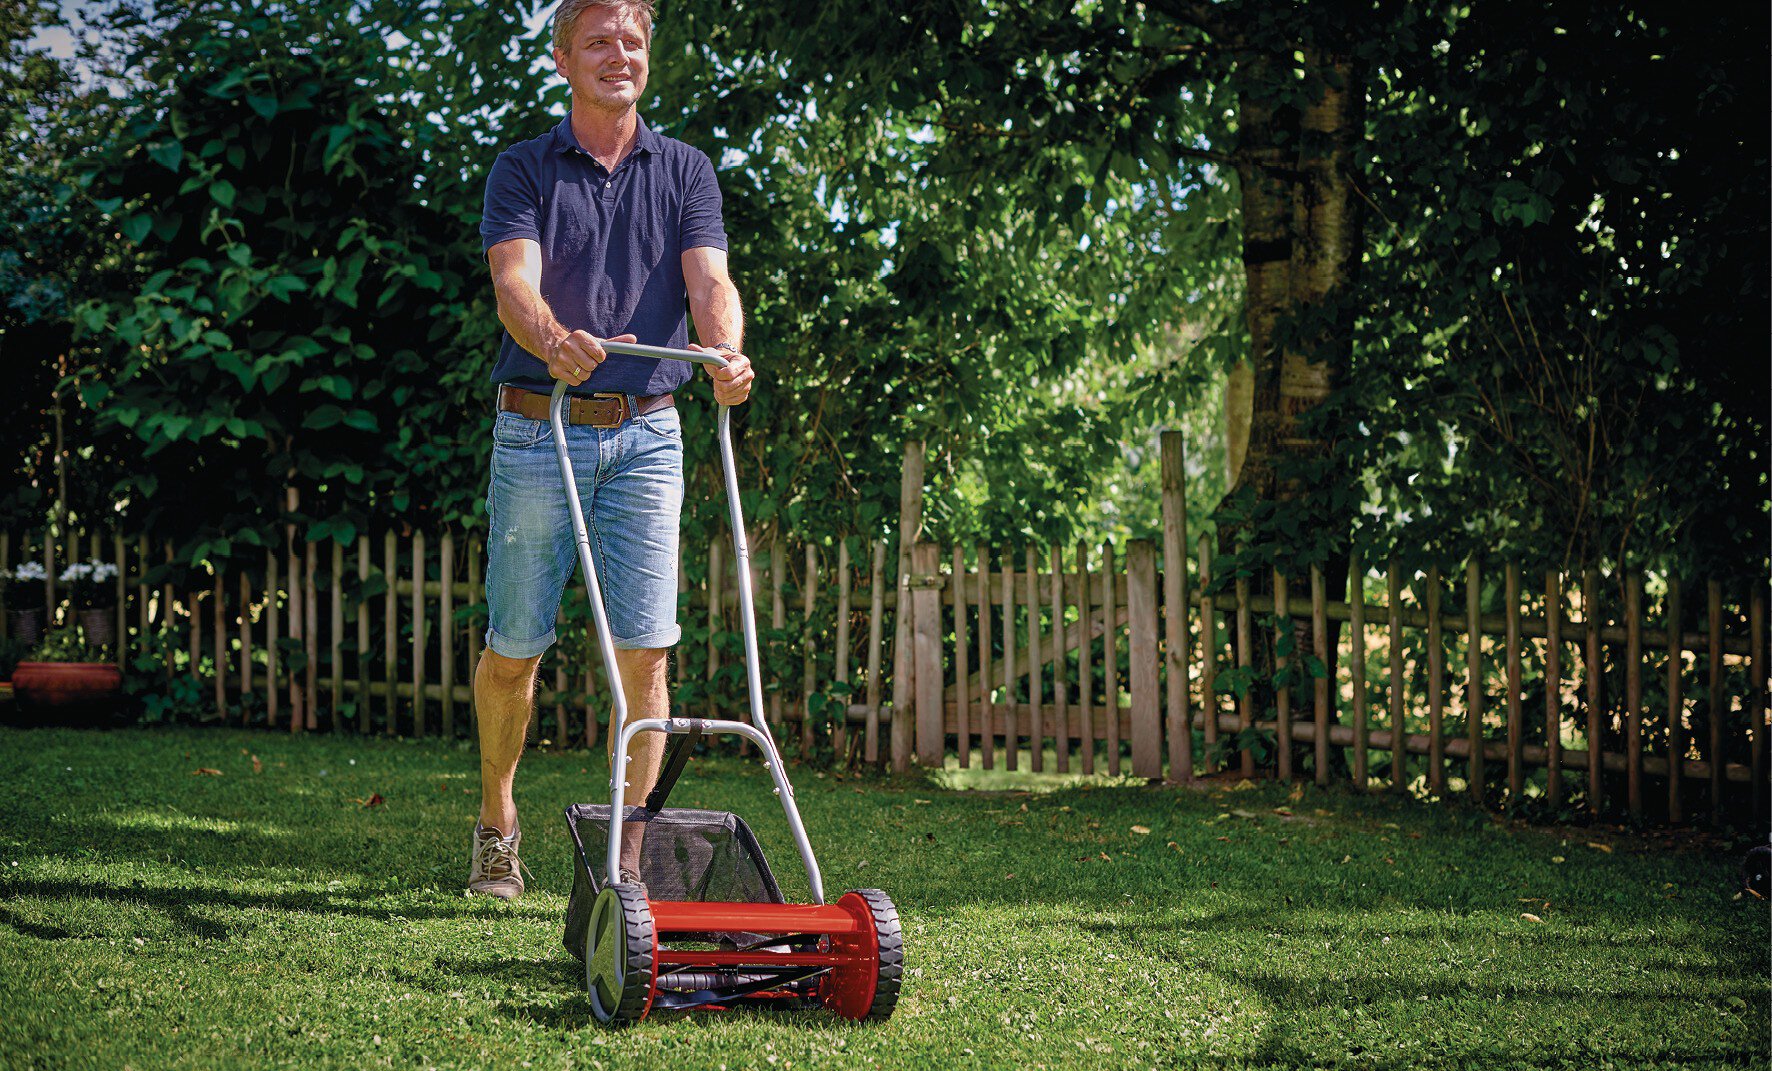 einhell-classic-hand-lawn-mower-3414114-example_usage-001